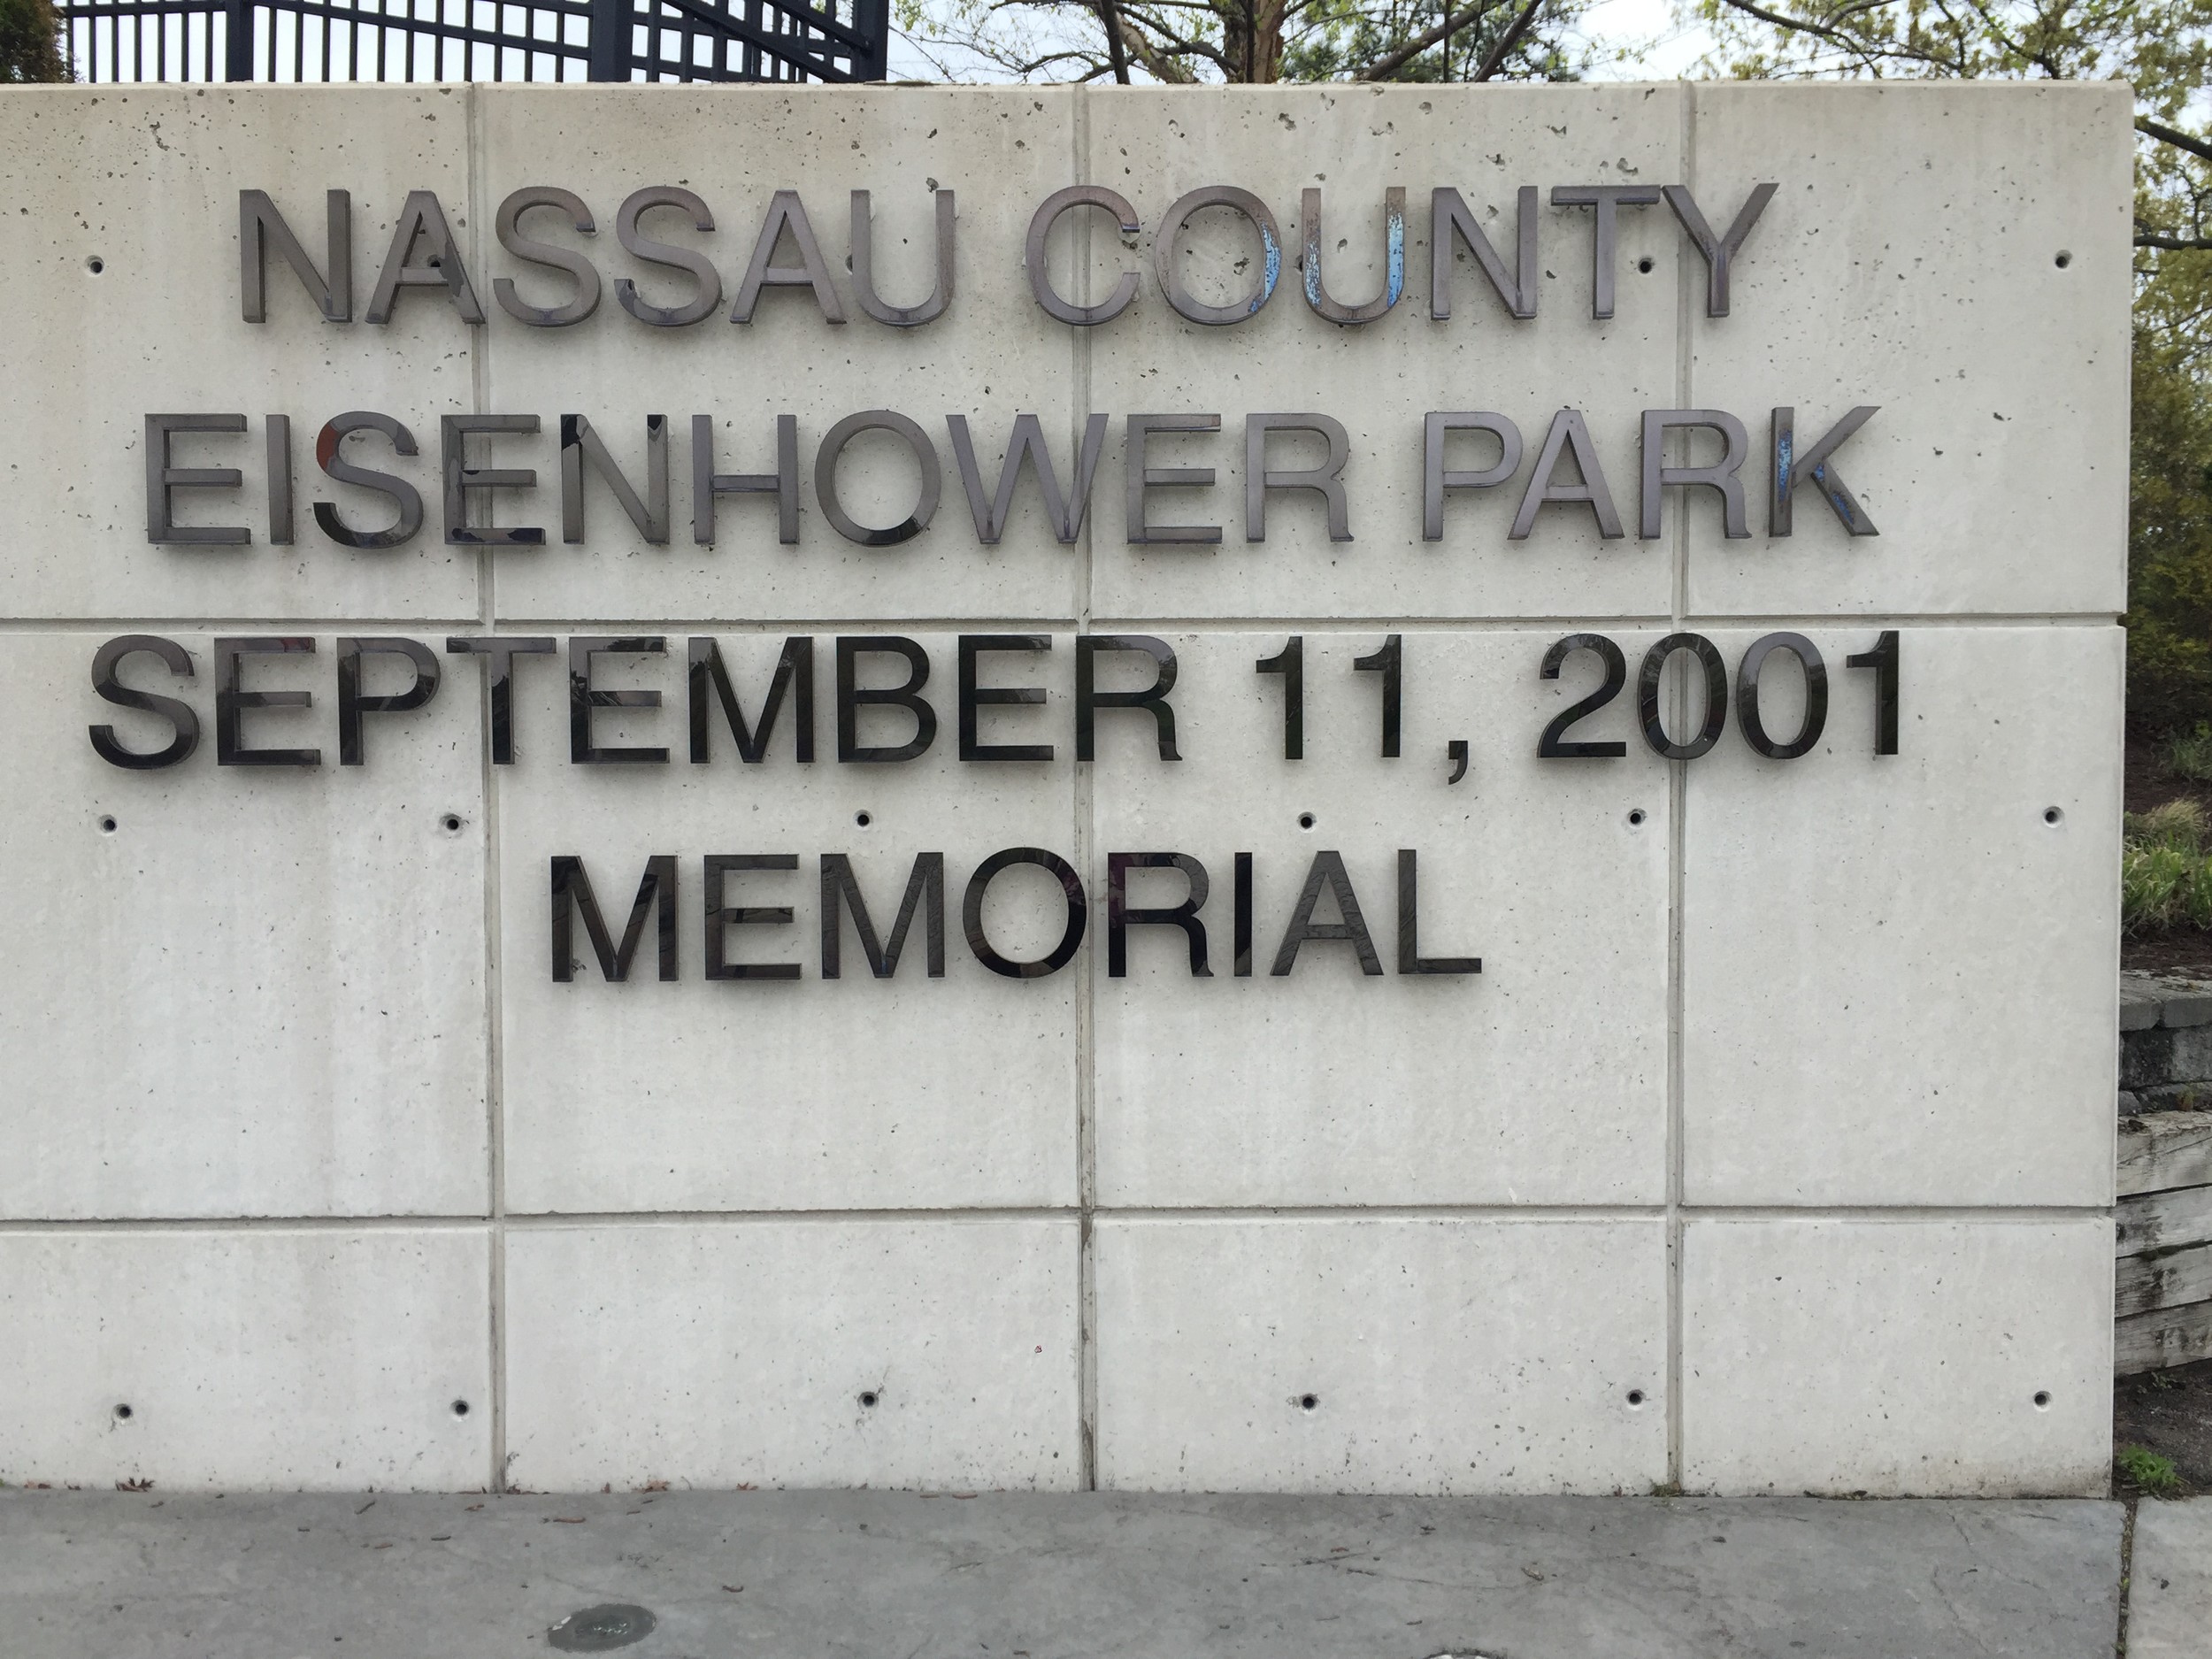 Visitors and passersby first noticed that a metal sign at the entrance to the memorial had rusted.